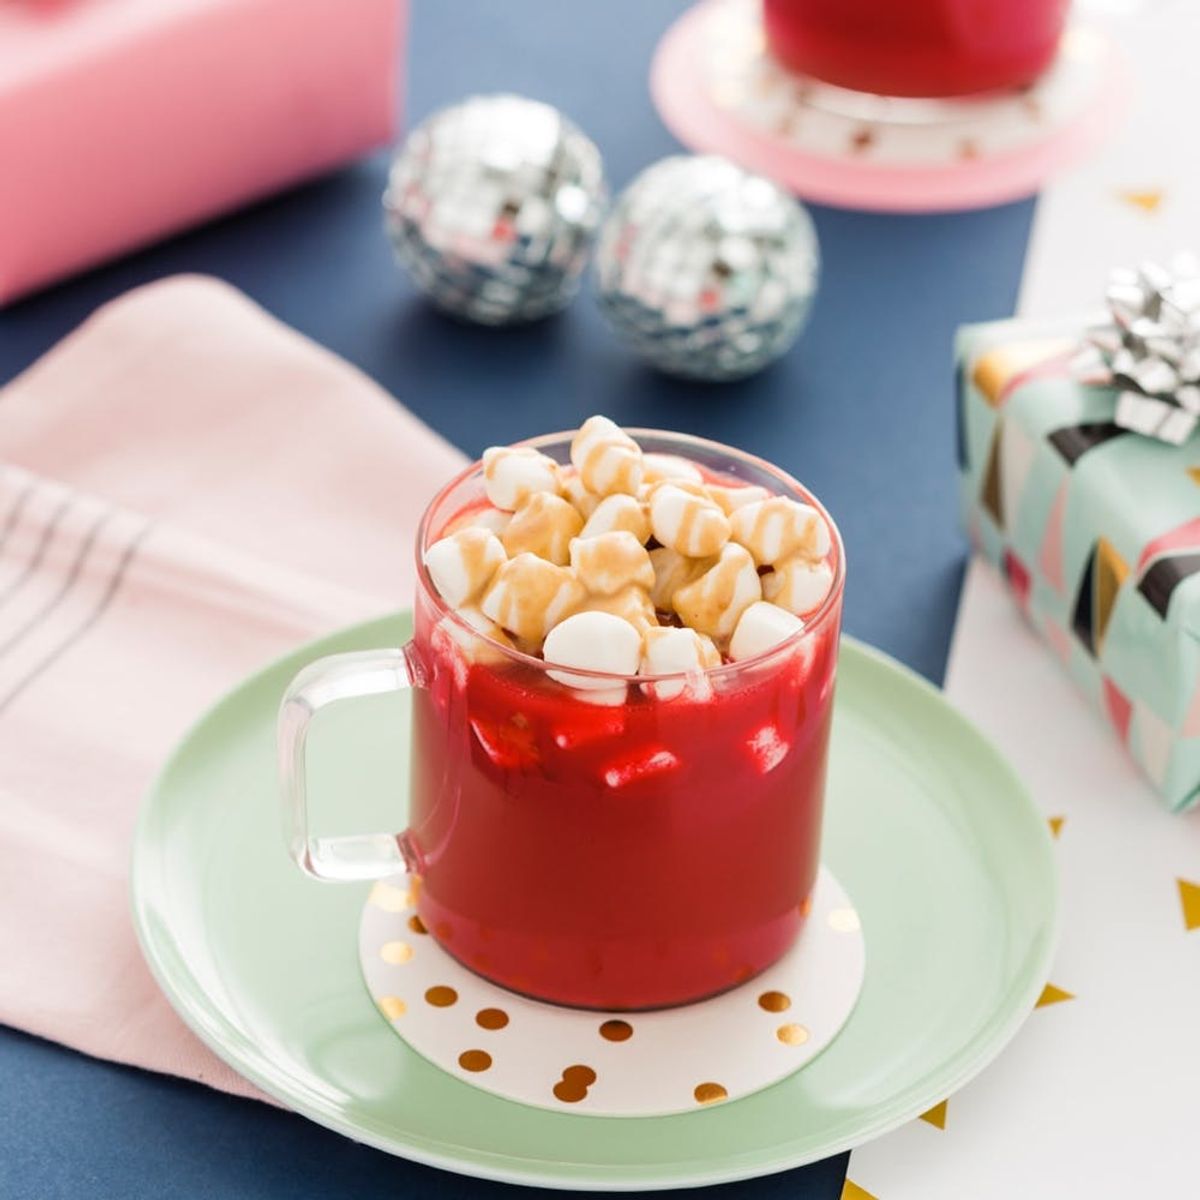 Your Hot Chocolate Needs a Red Velvet Upgrade